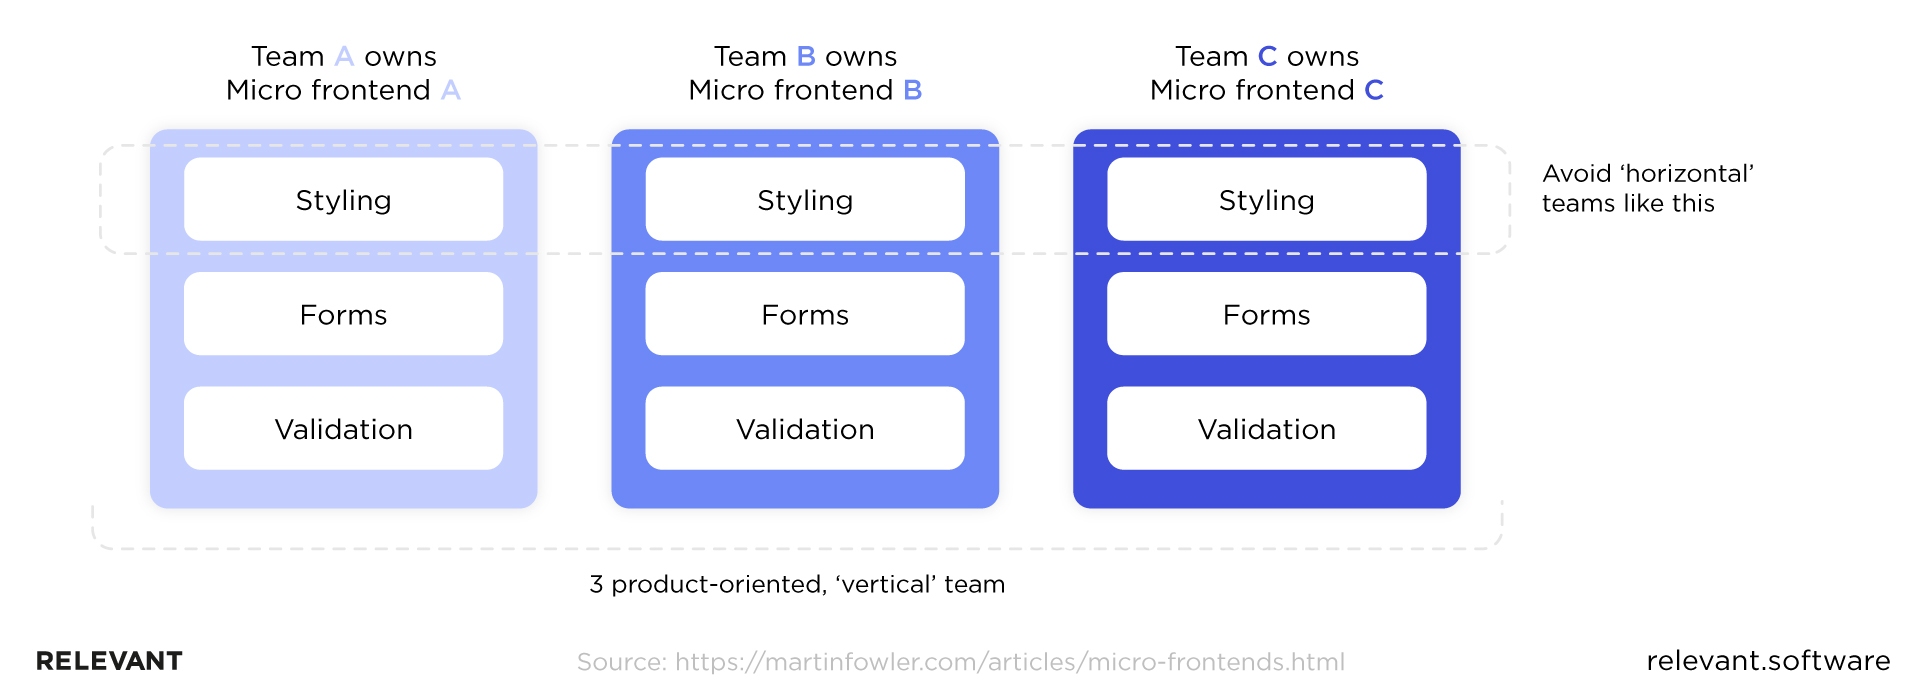 micro frontends 3 product-oriented, vertical team
